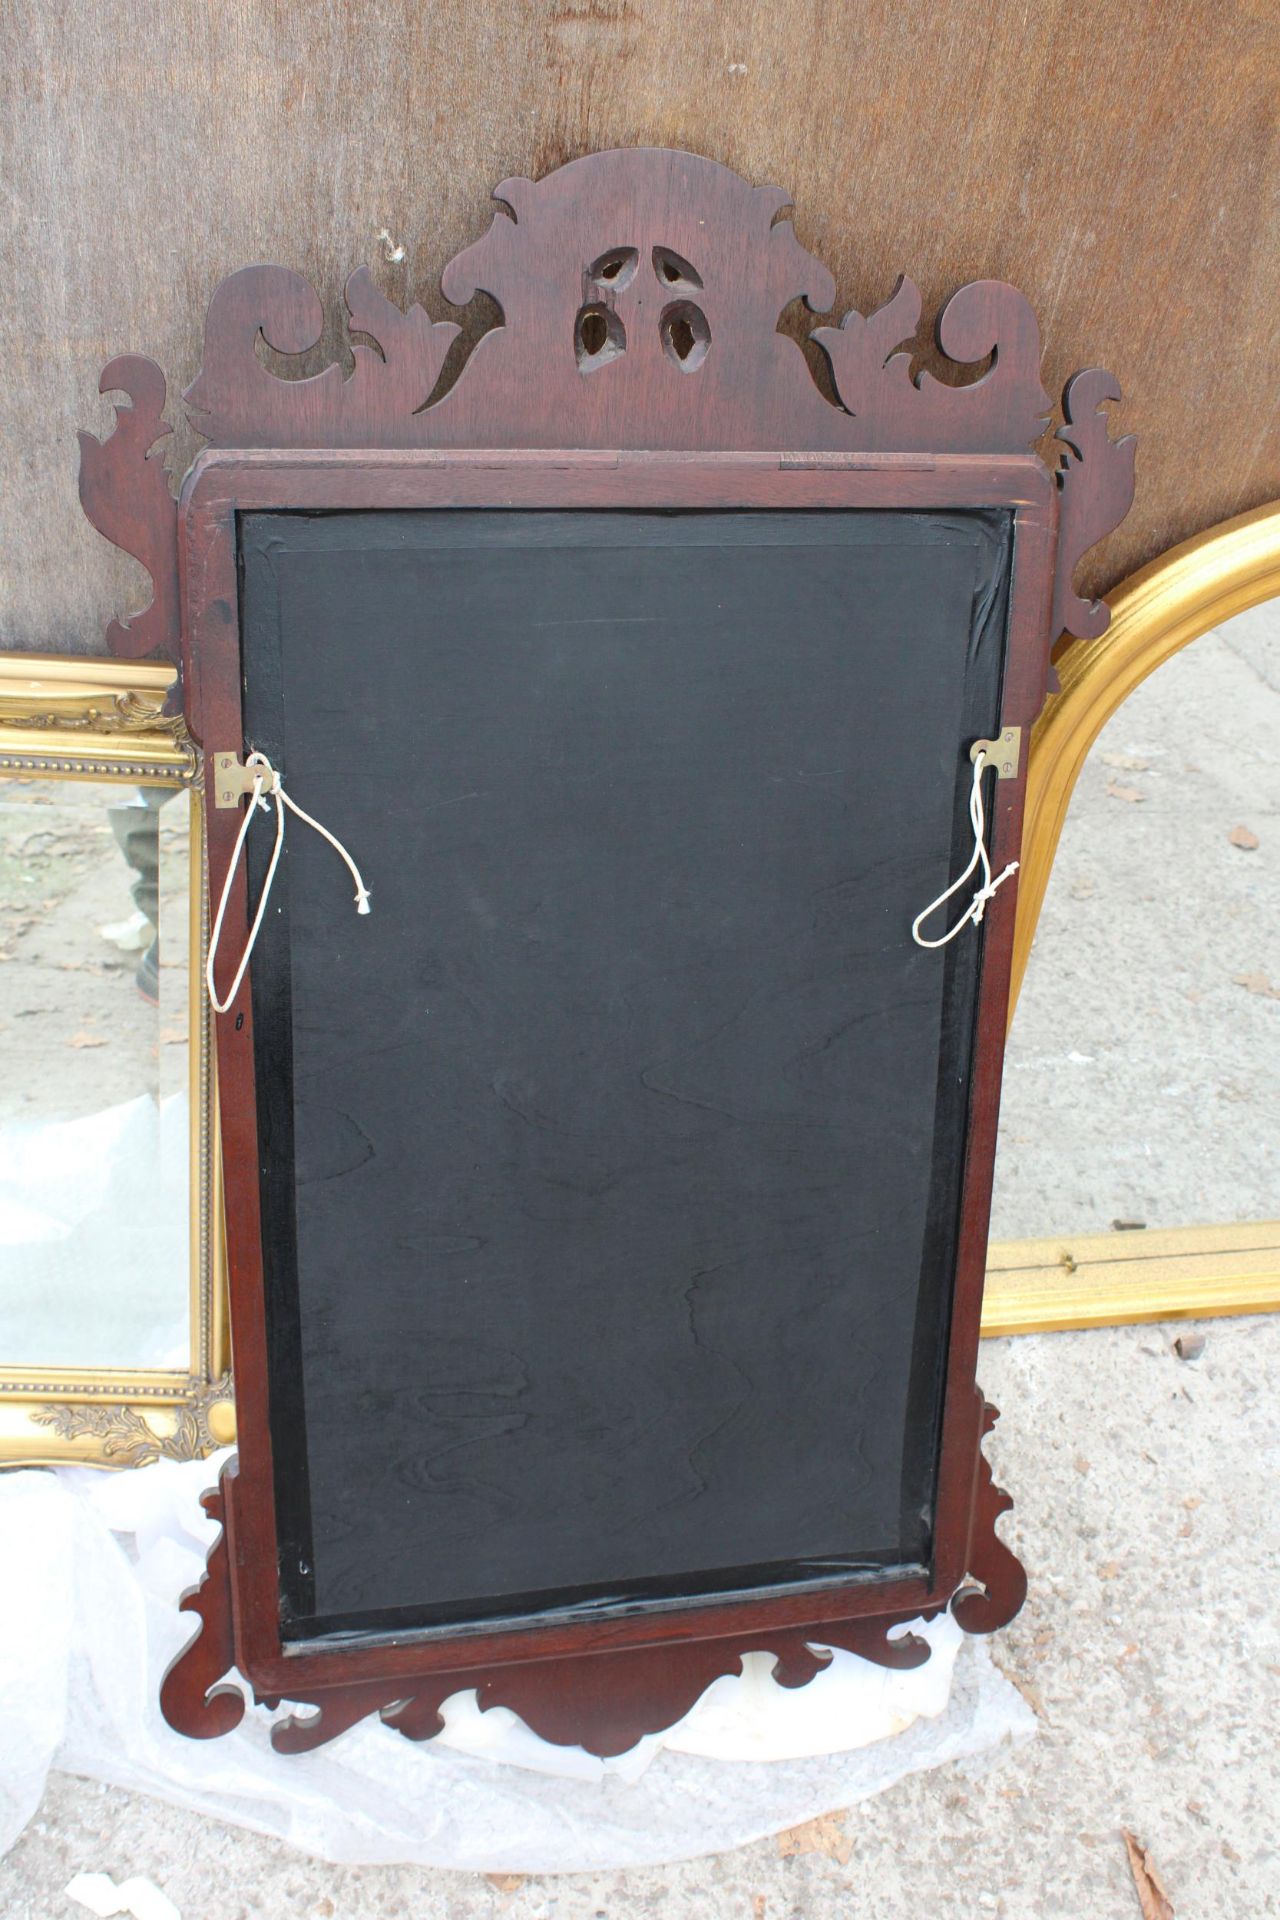 A 19TH CENTURY STYLE MAHOGANY WALL MIRROR WITH GOLD COLOURED EAGLE CARVING 41" X 24" - Image 4 of 4